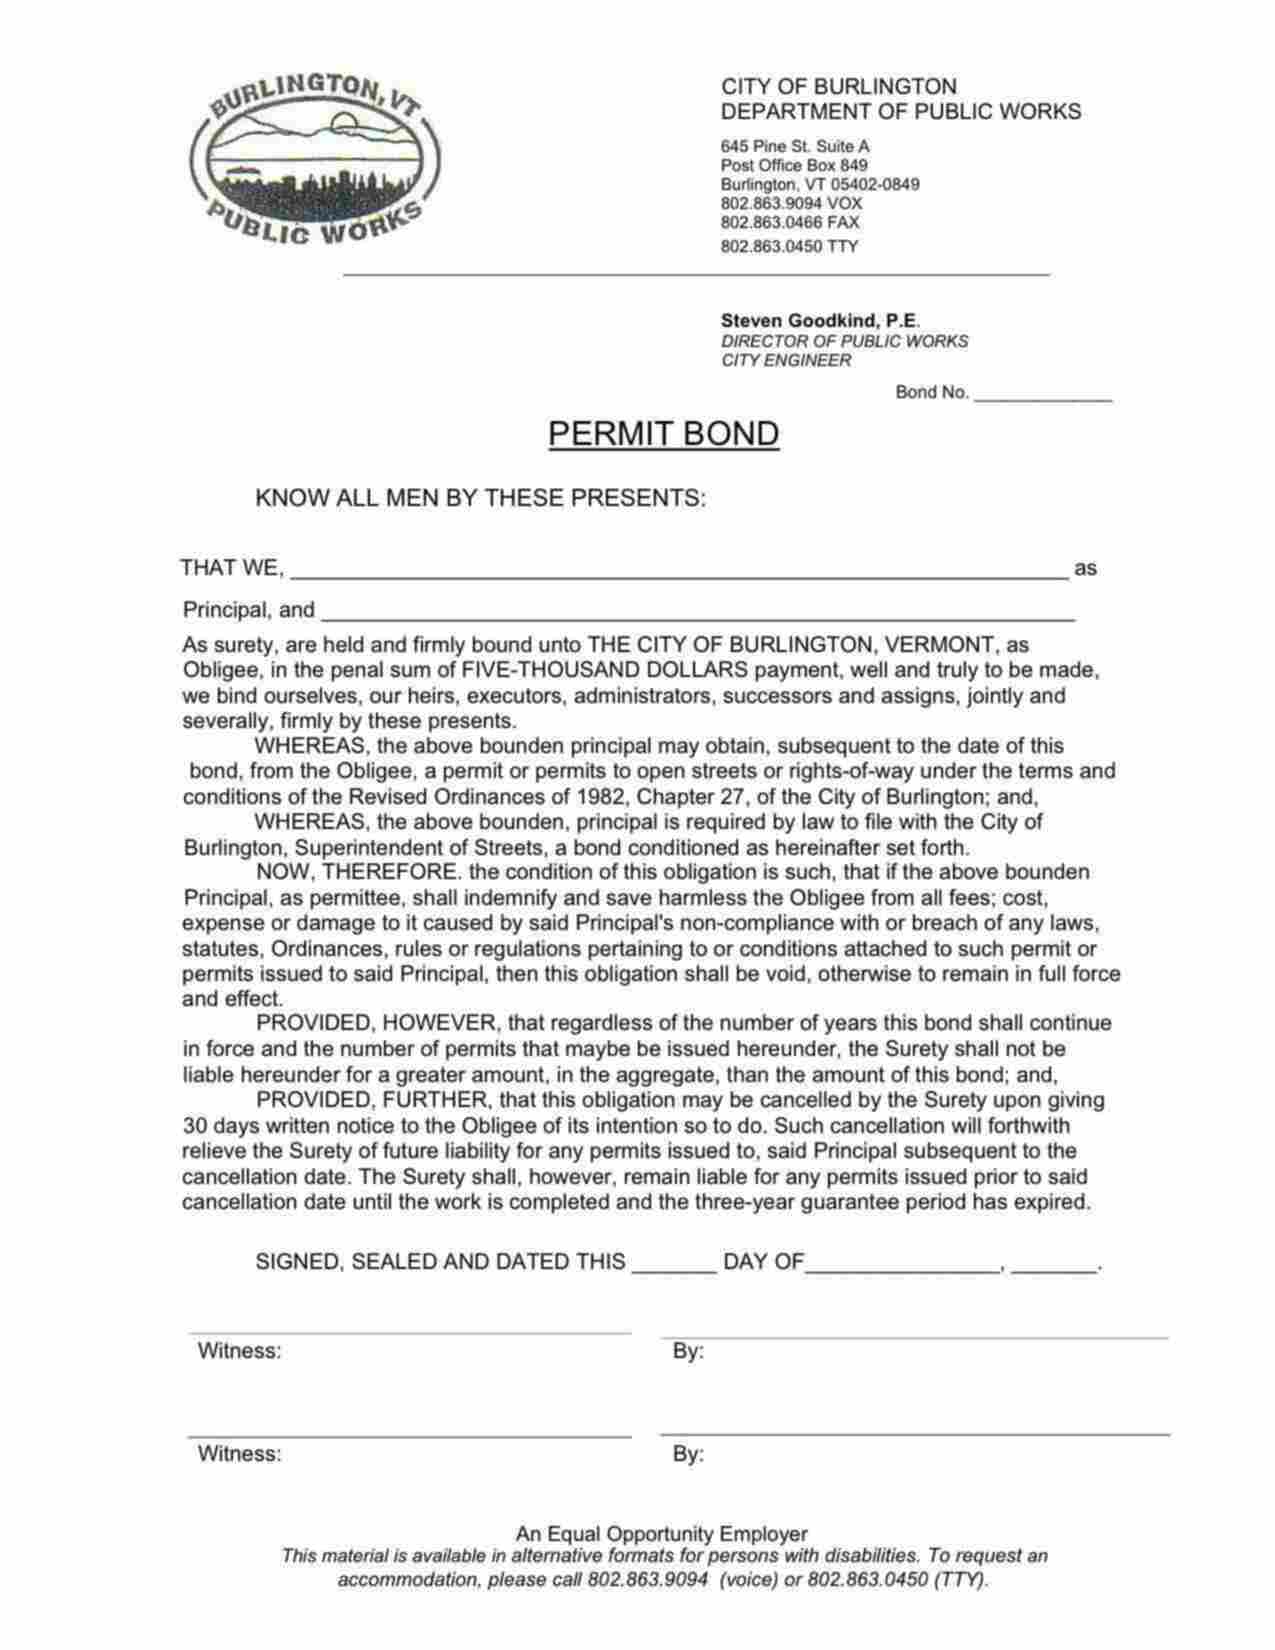 Vermont Street Opening/Right-of-Way Bond Form